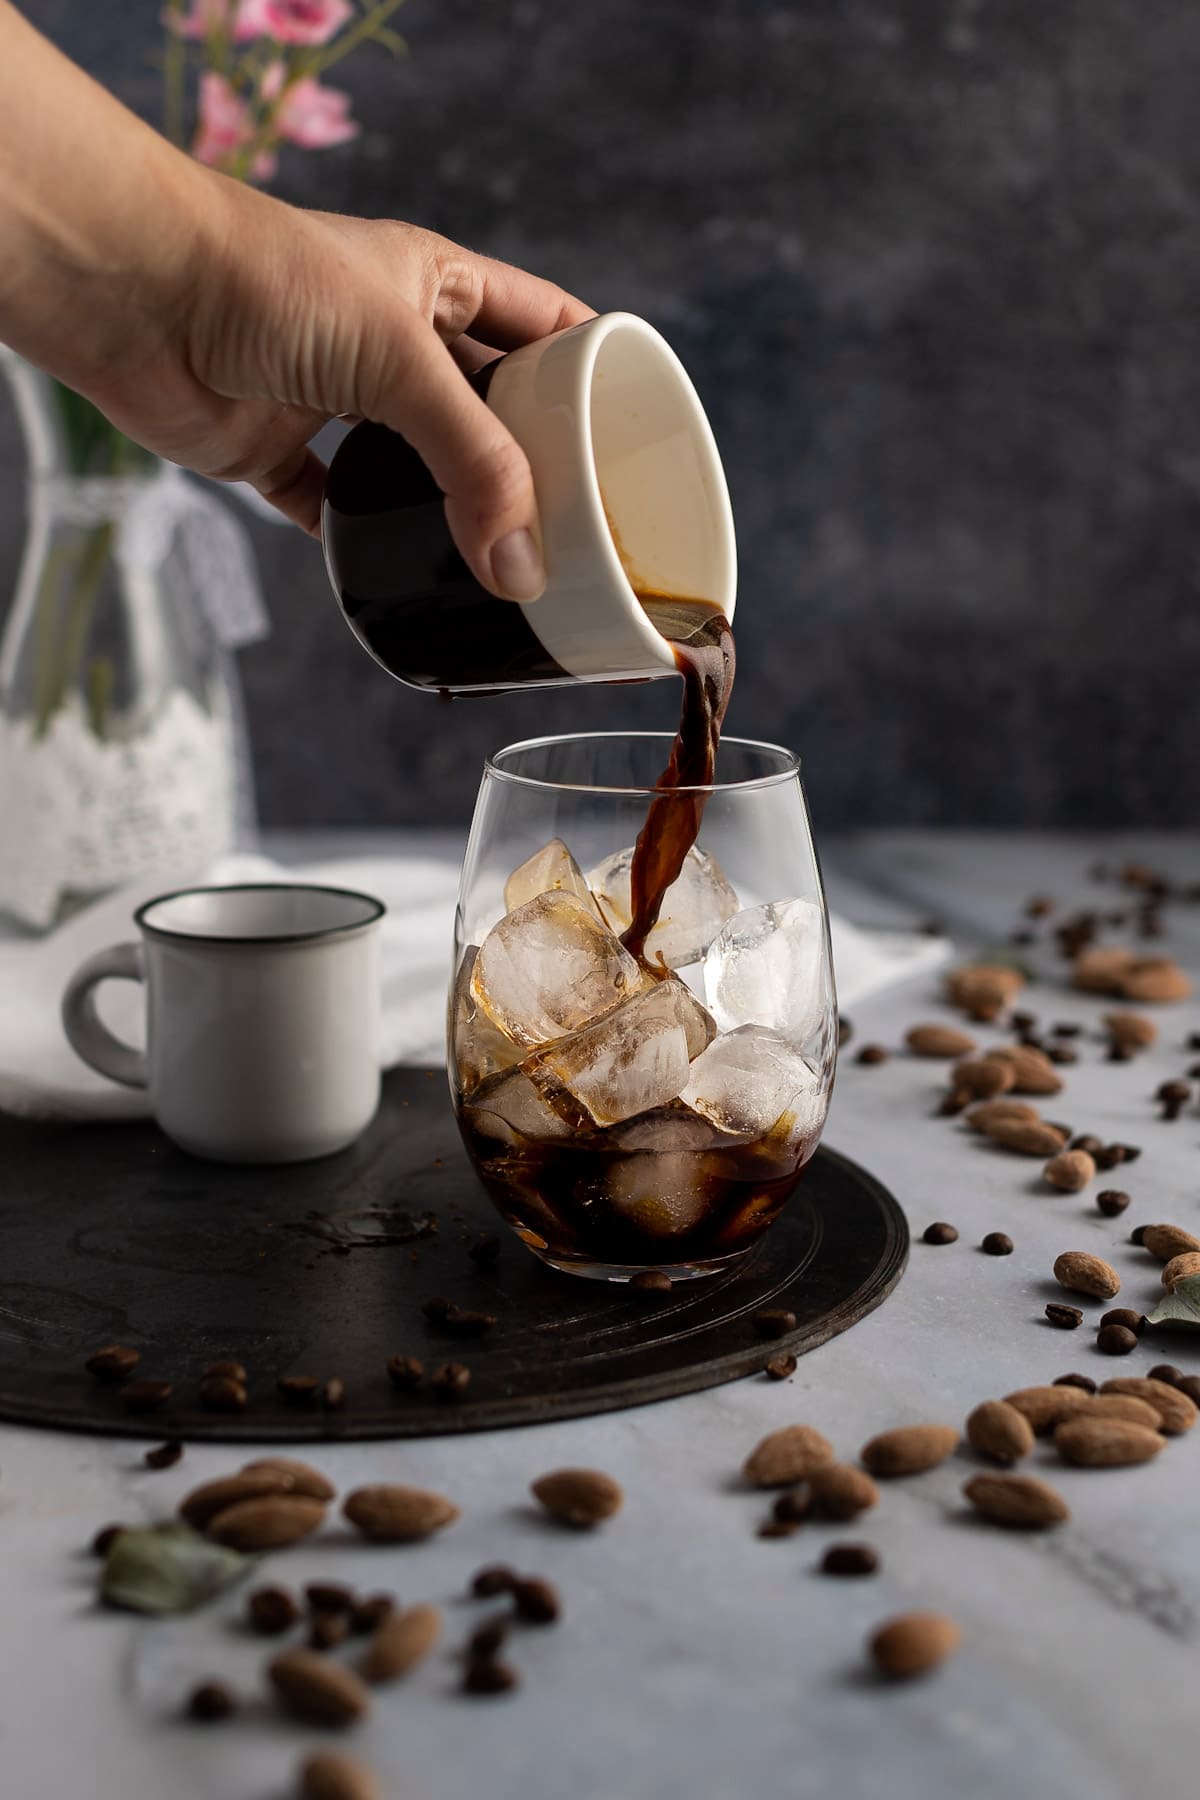 A hand pouring a cup of espresso into a glass filled with ice, sitting on a table with scattered almonds and coffee beans.